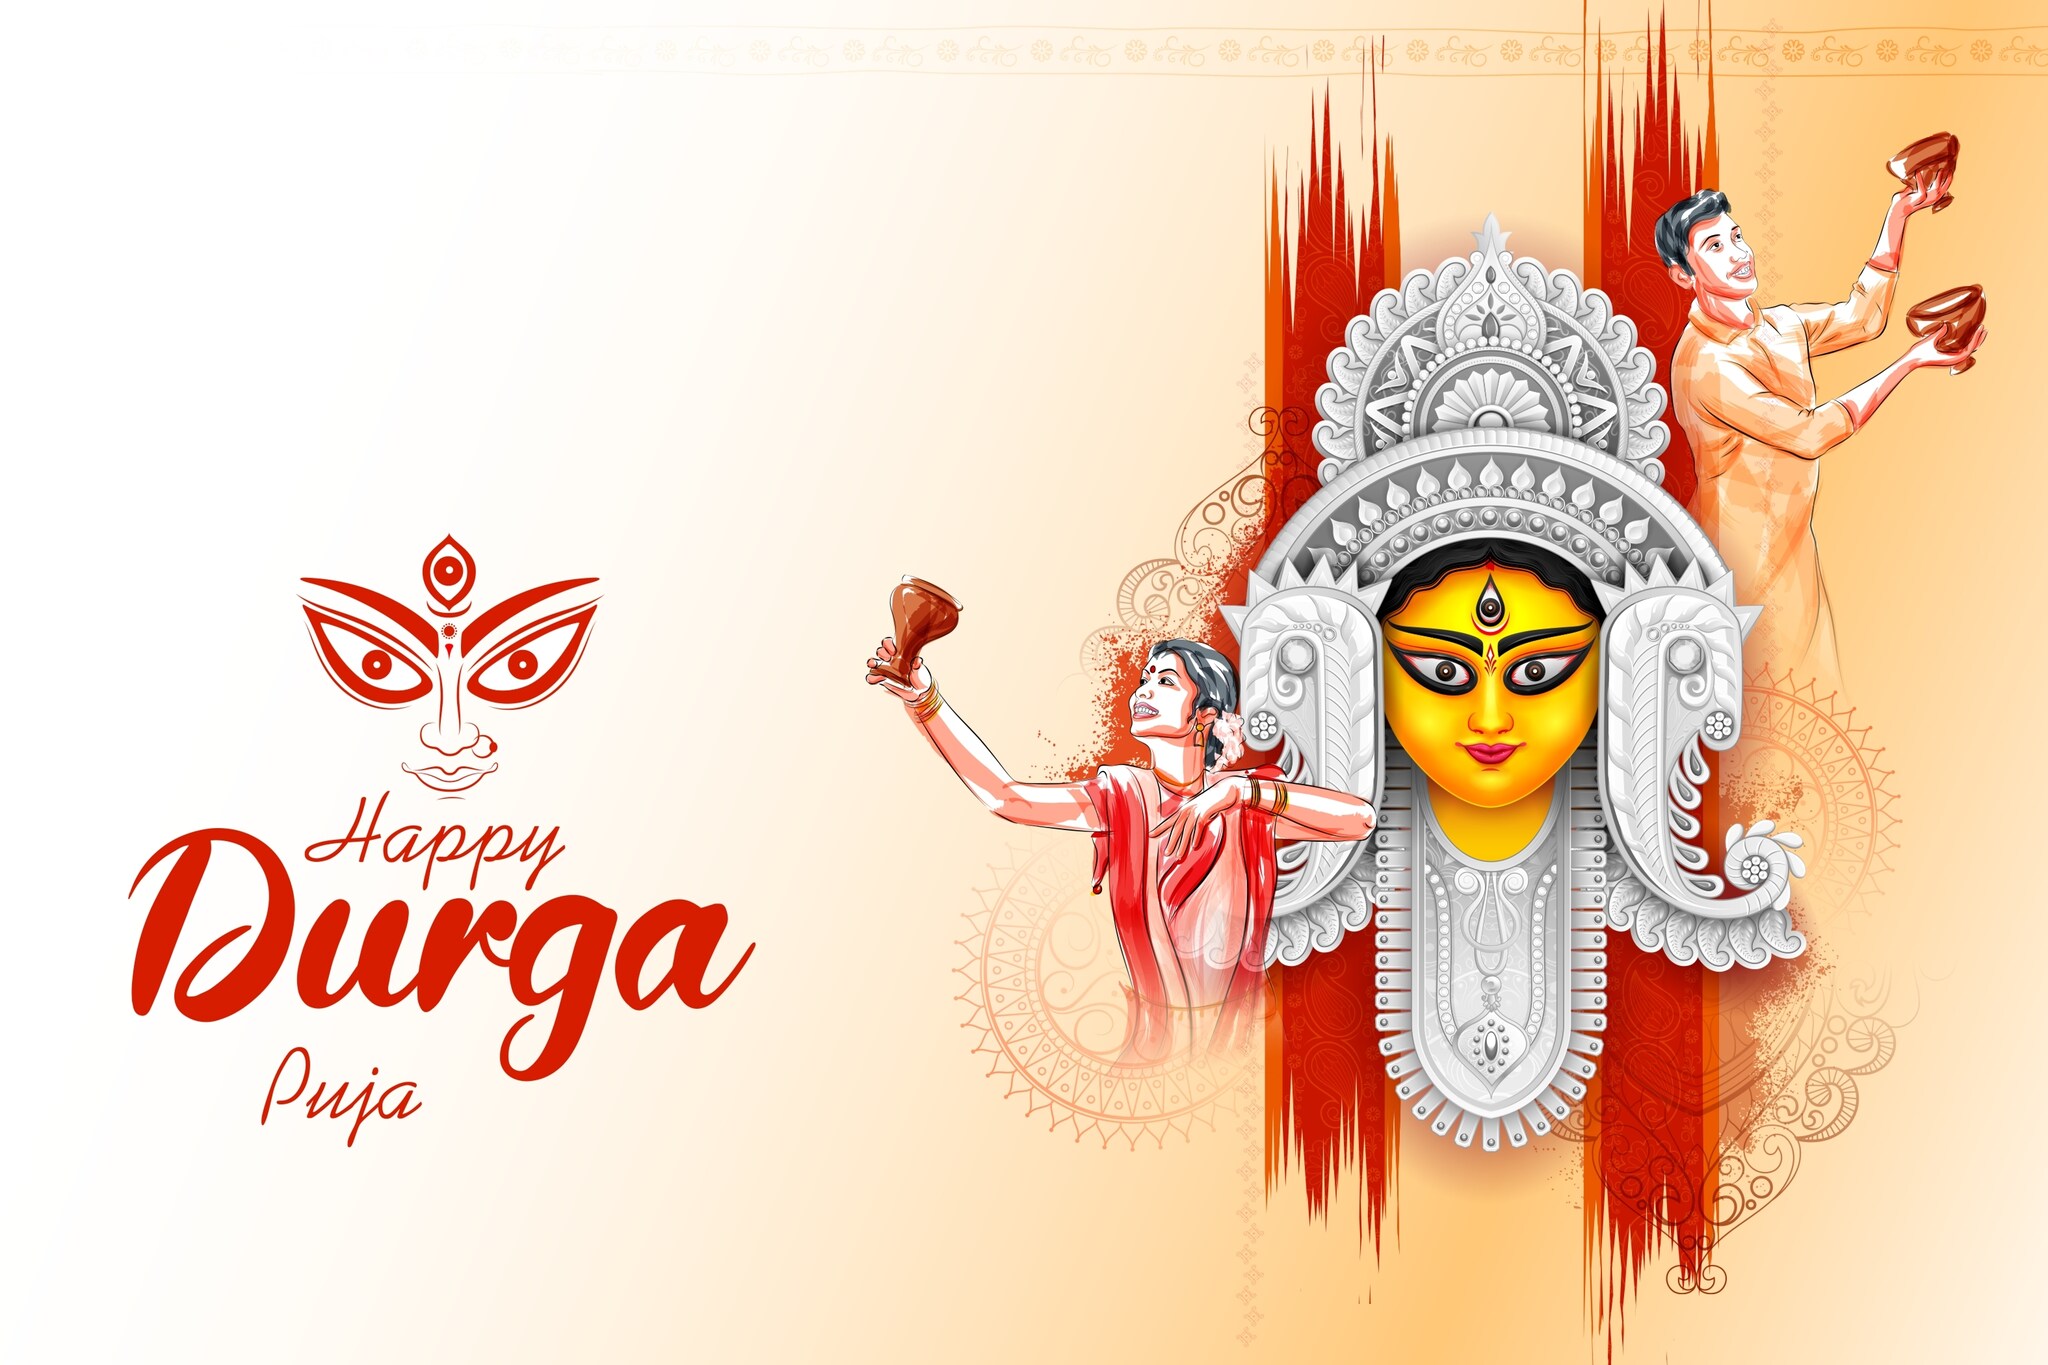 Happy Durga Puja 2022 Wishes, Images, Quotes, Status, Photos, Pics, SMS and Messages to share. (Image: Shutterstock)